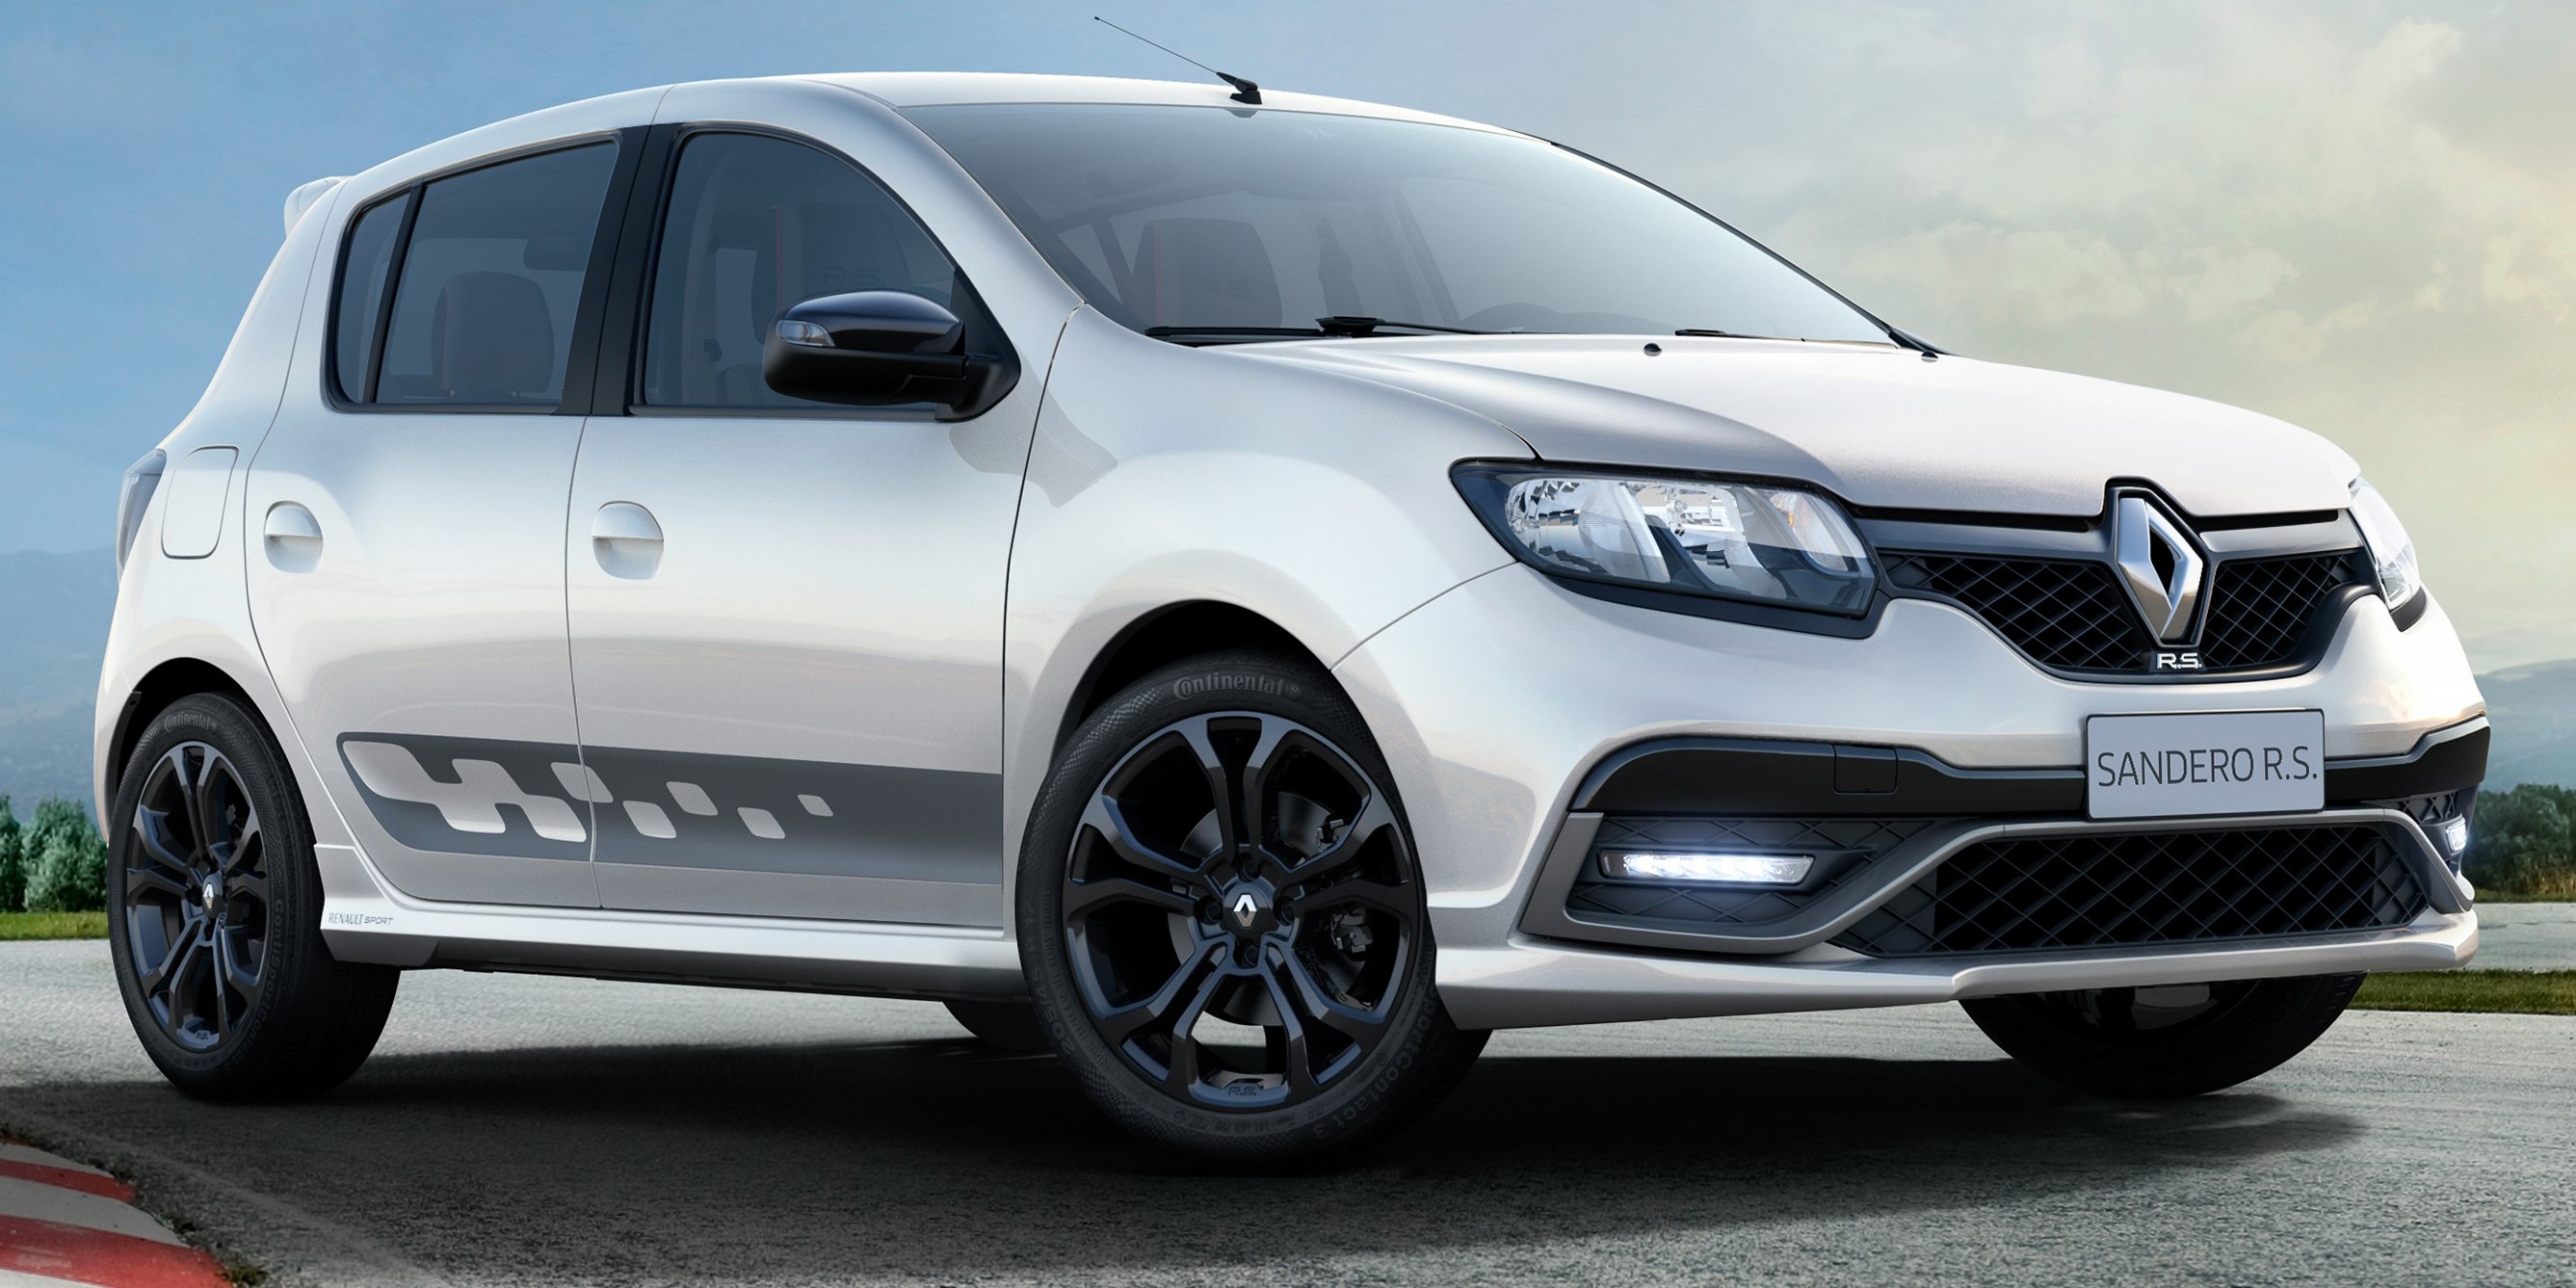 Renault Sandero RS 2.0 first RS built outside Europe